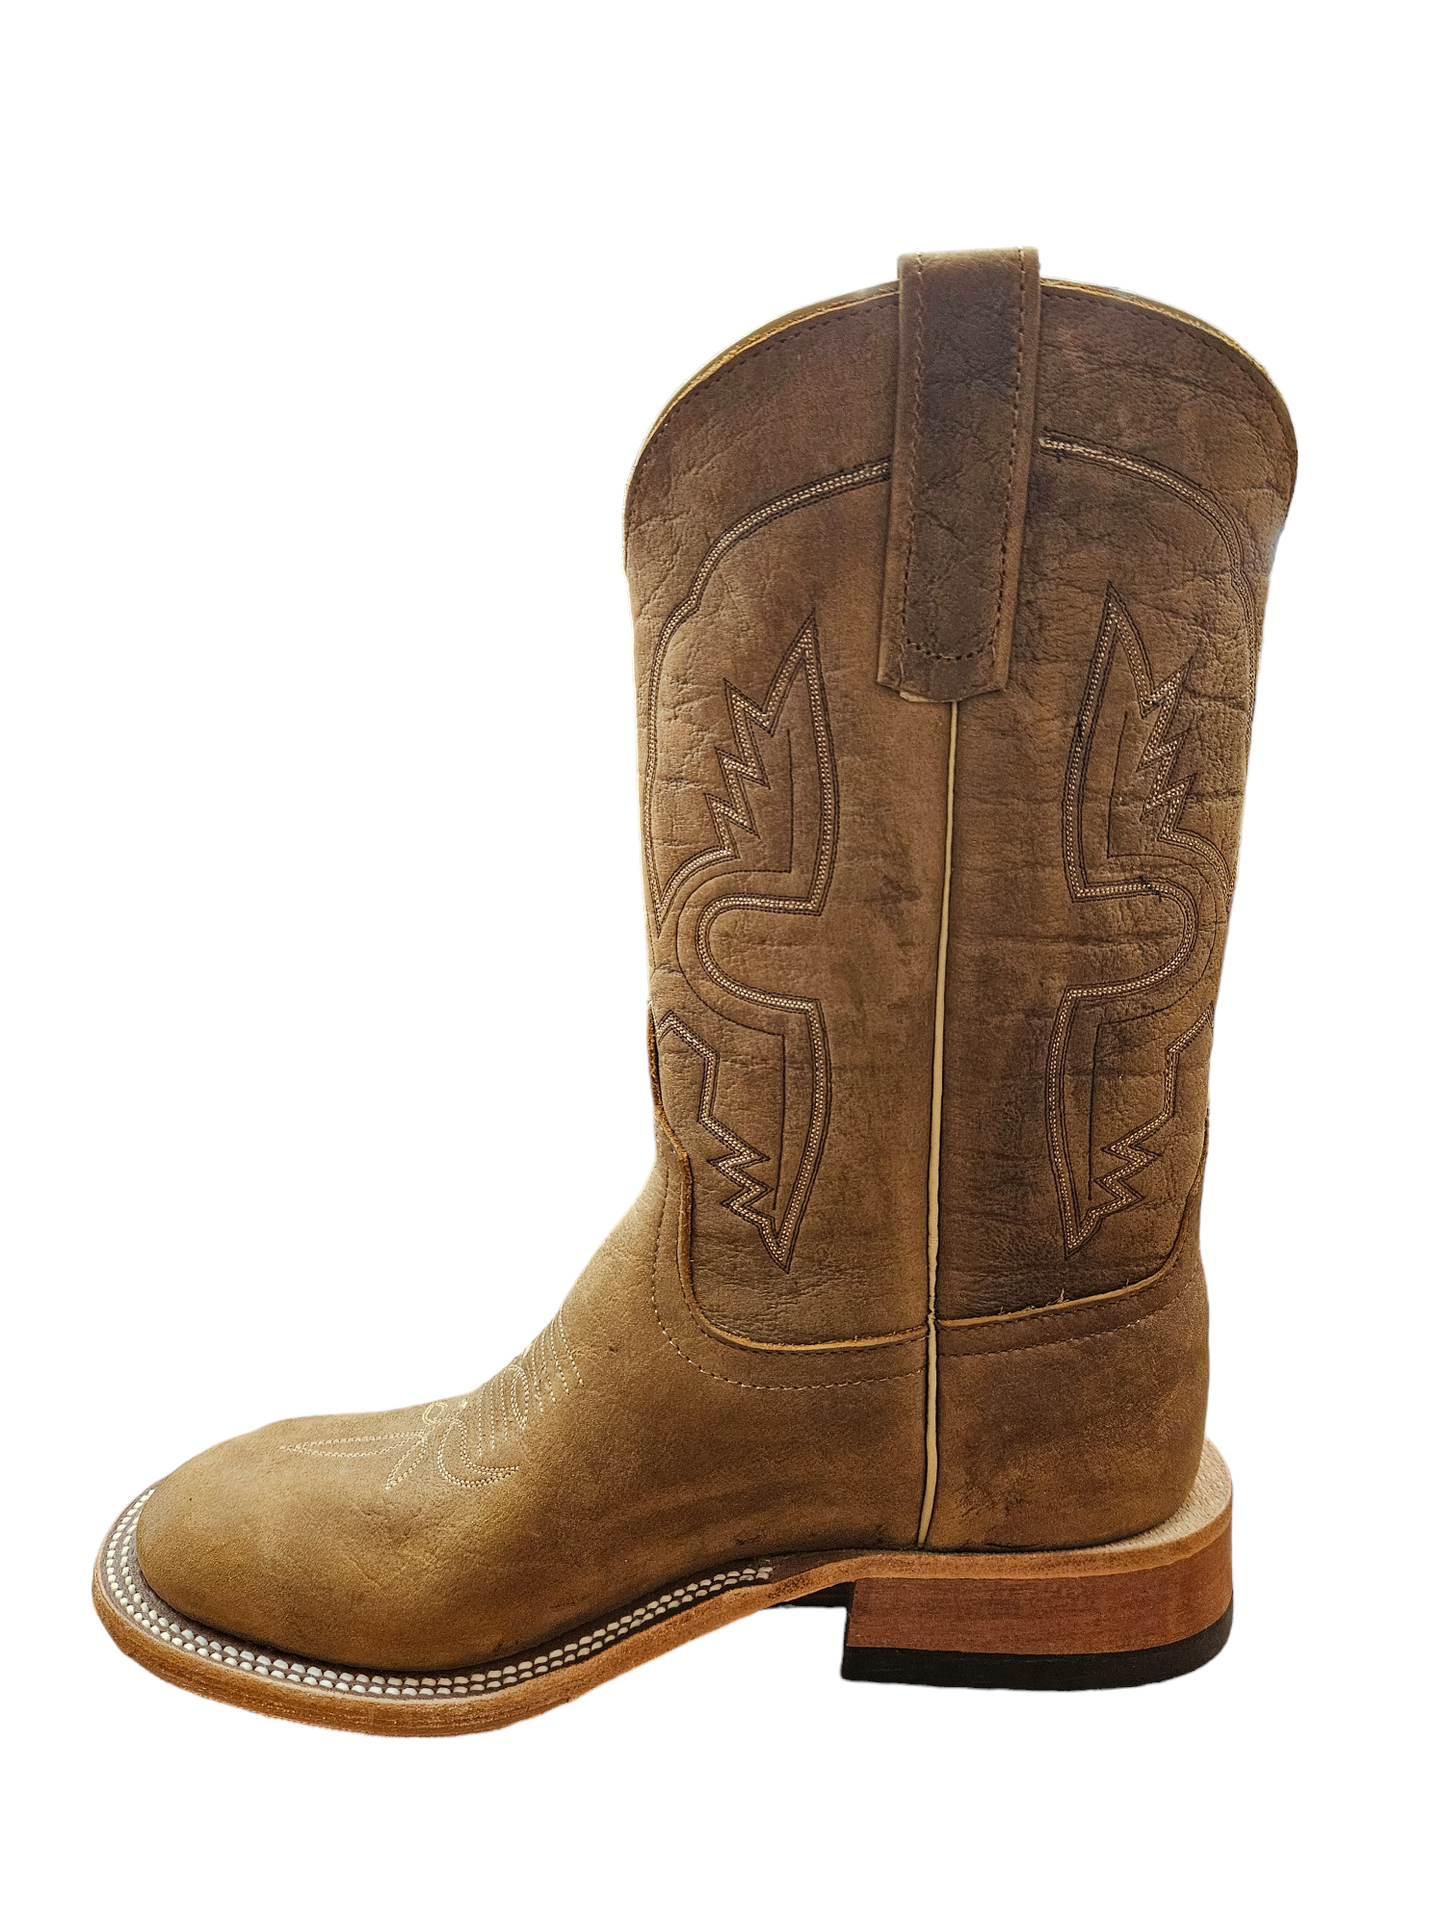 MEN'S ANDERSON BEAN ROUND TOE WESTERN BOOT EXCLUSIVES 338257